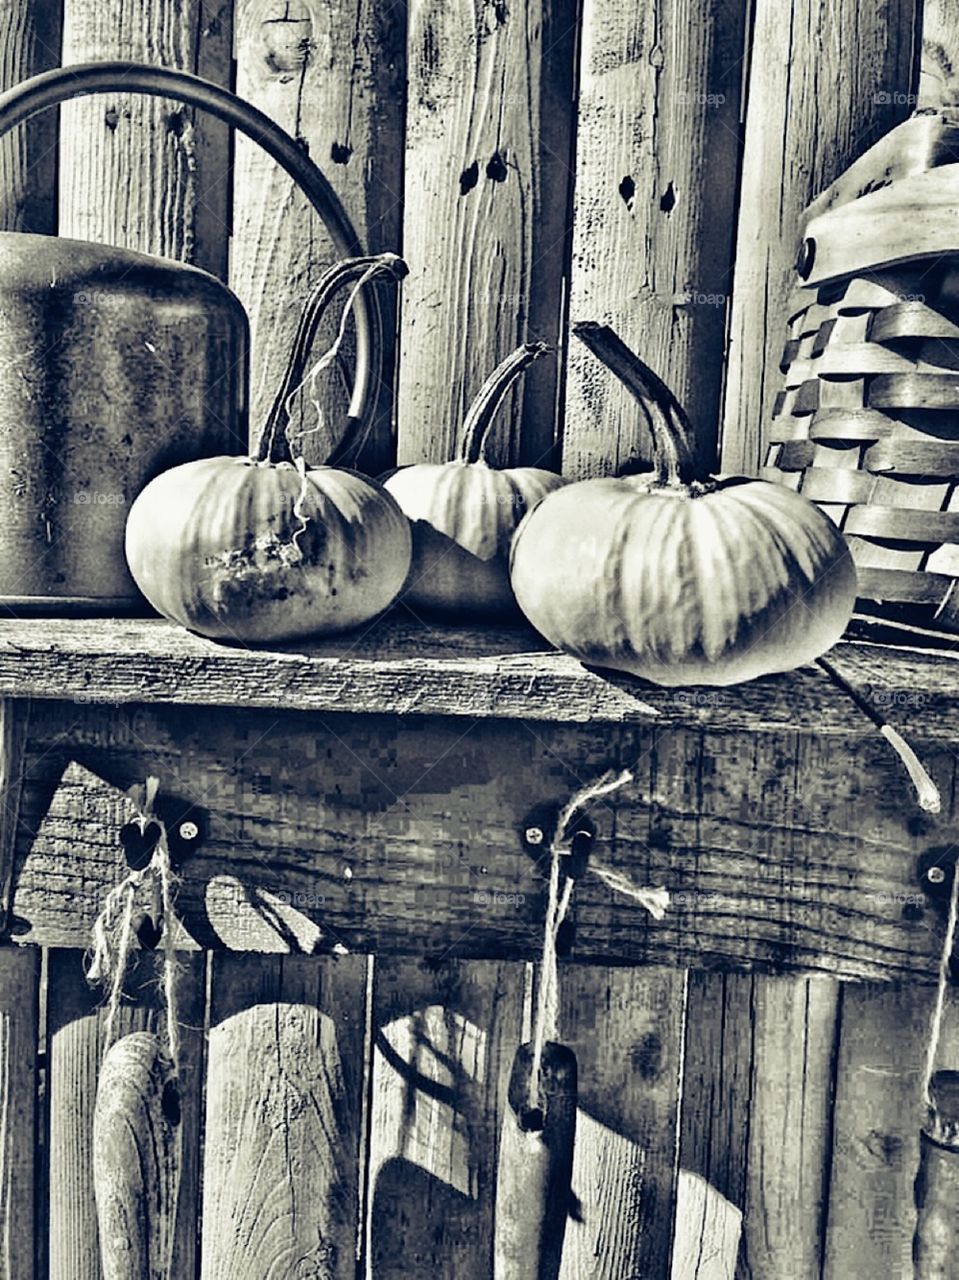 Rustic wood garden fence and shelf with miniature pumpkins old copper watering can ,  a basket and hanging garden tools outside decoration 